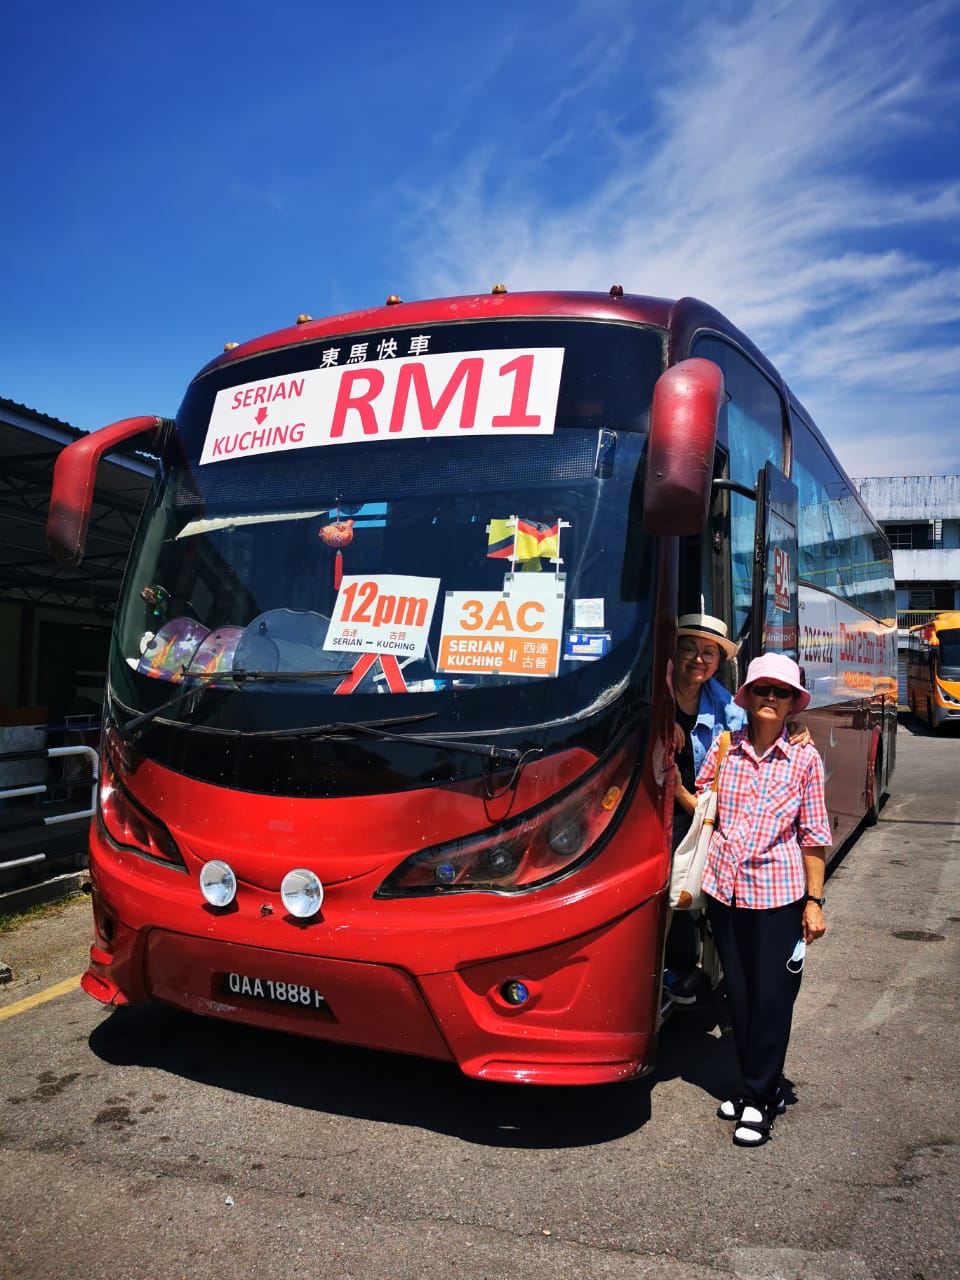 ‘Have RM1, will travel’